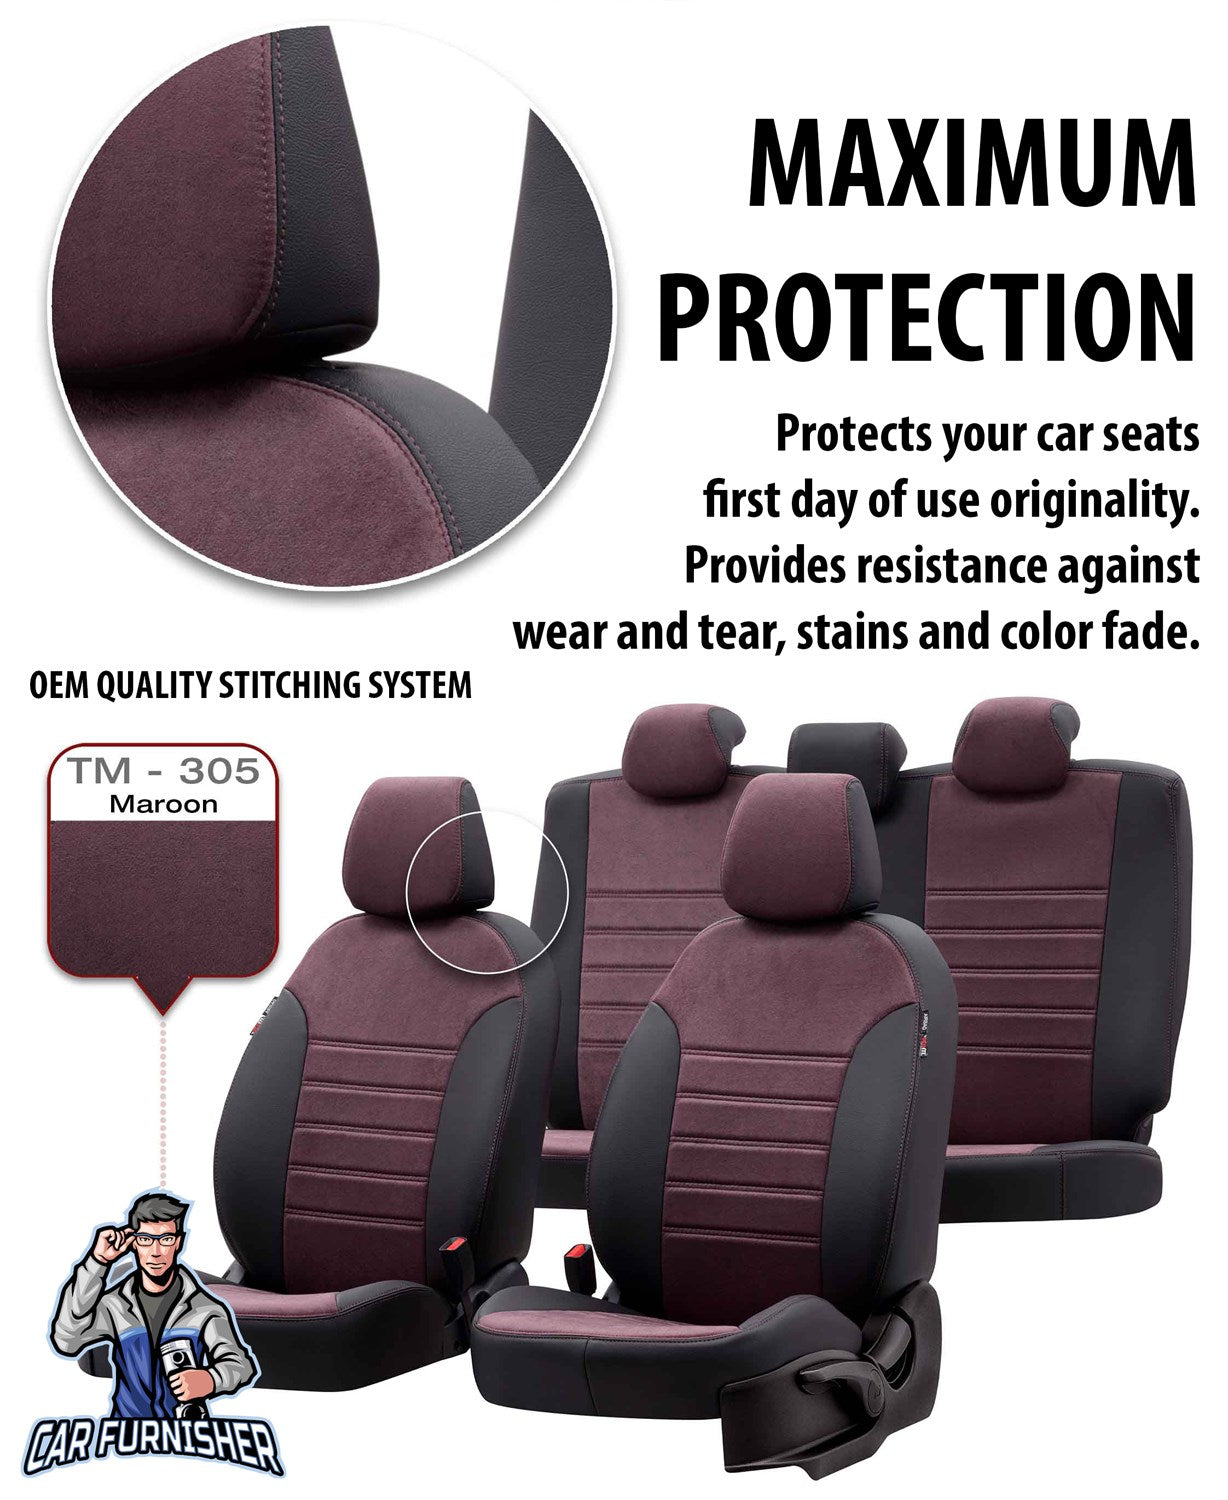 Peugeot 206 Seat Covers Milano Suede Design Burgundy Leather & Suede Fabric